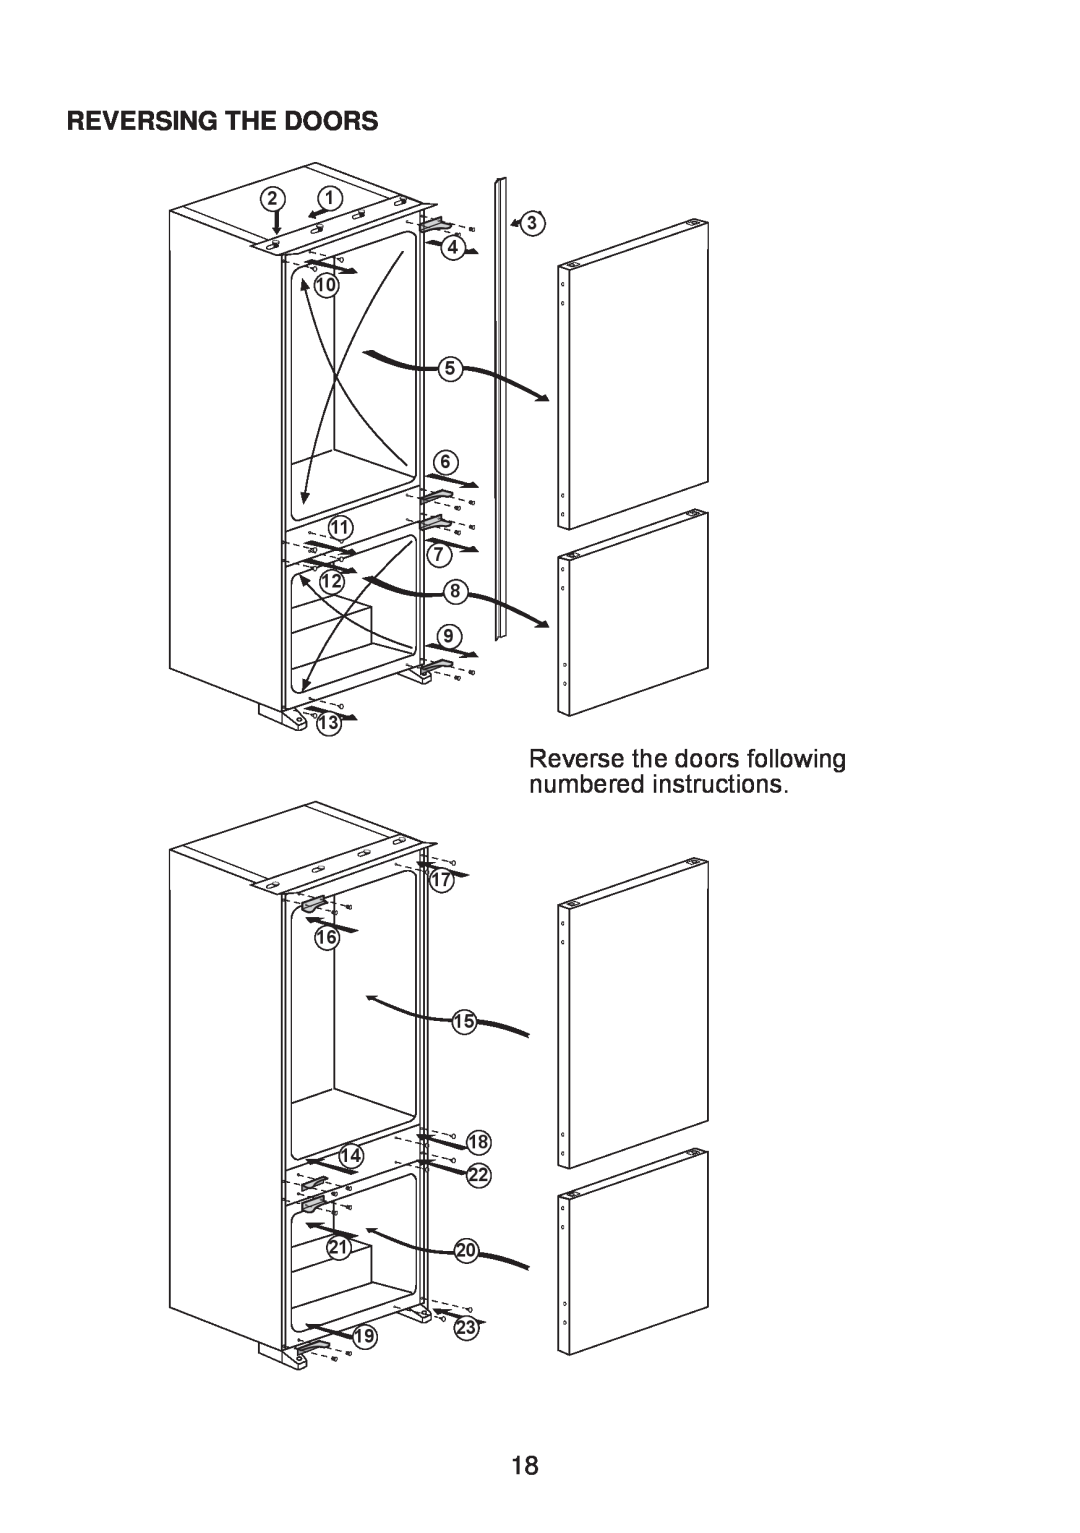 Glen Dimplex Home Appliances Ltd IFF5050 manual Reversing The Doors, Reverse the doors following numbered instructions 